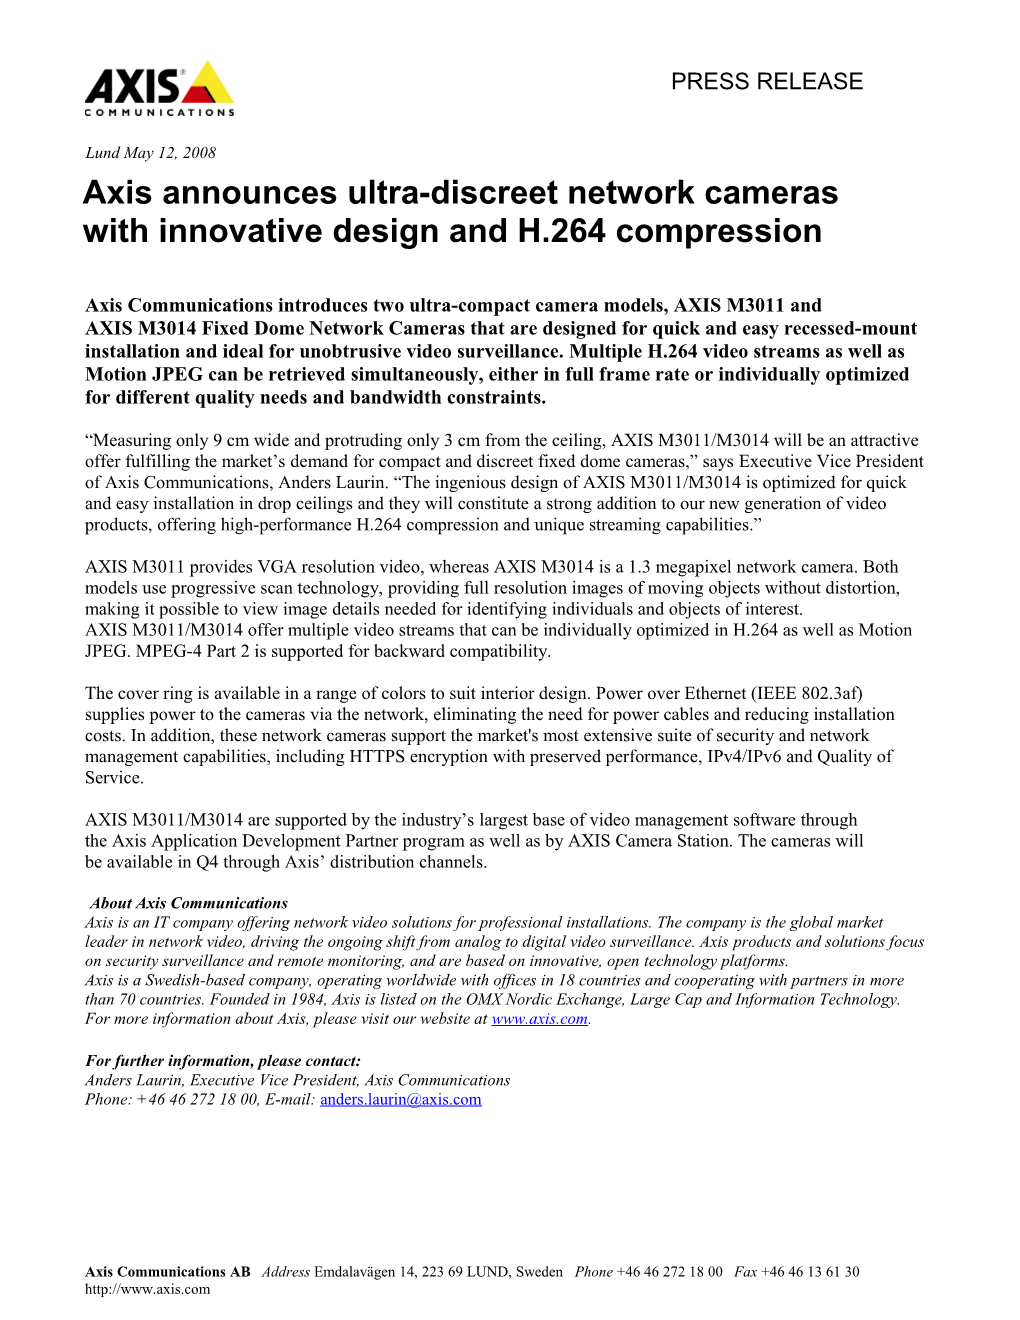 Axis Communications Introduces Two Ultra-Compact Camera Models, AXIS M3011 And